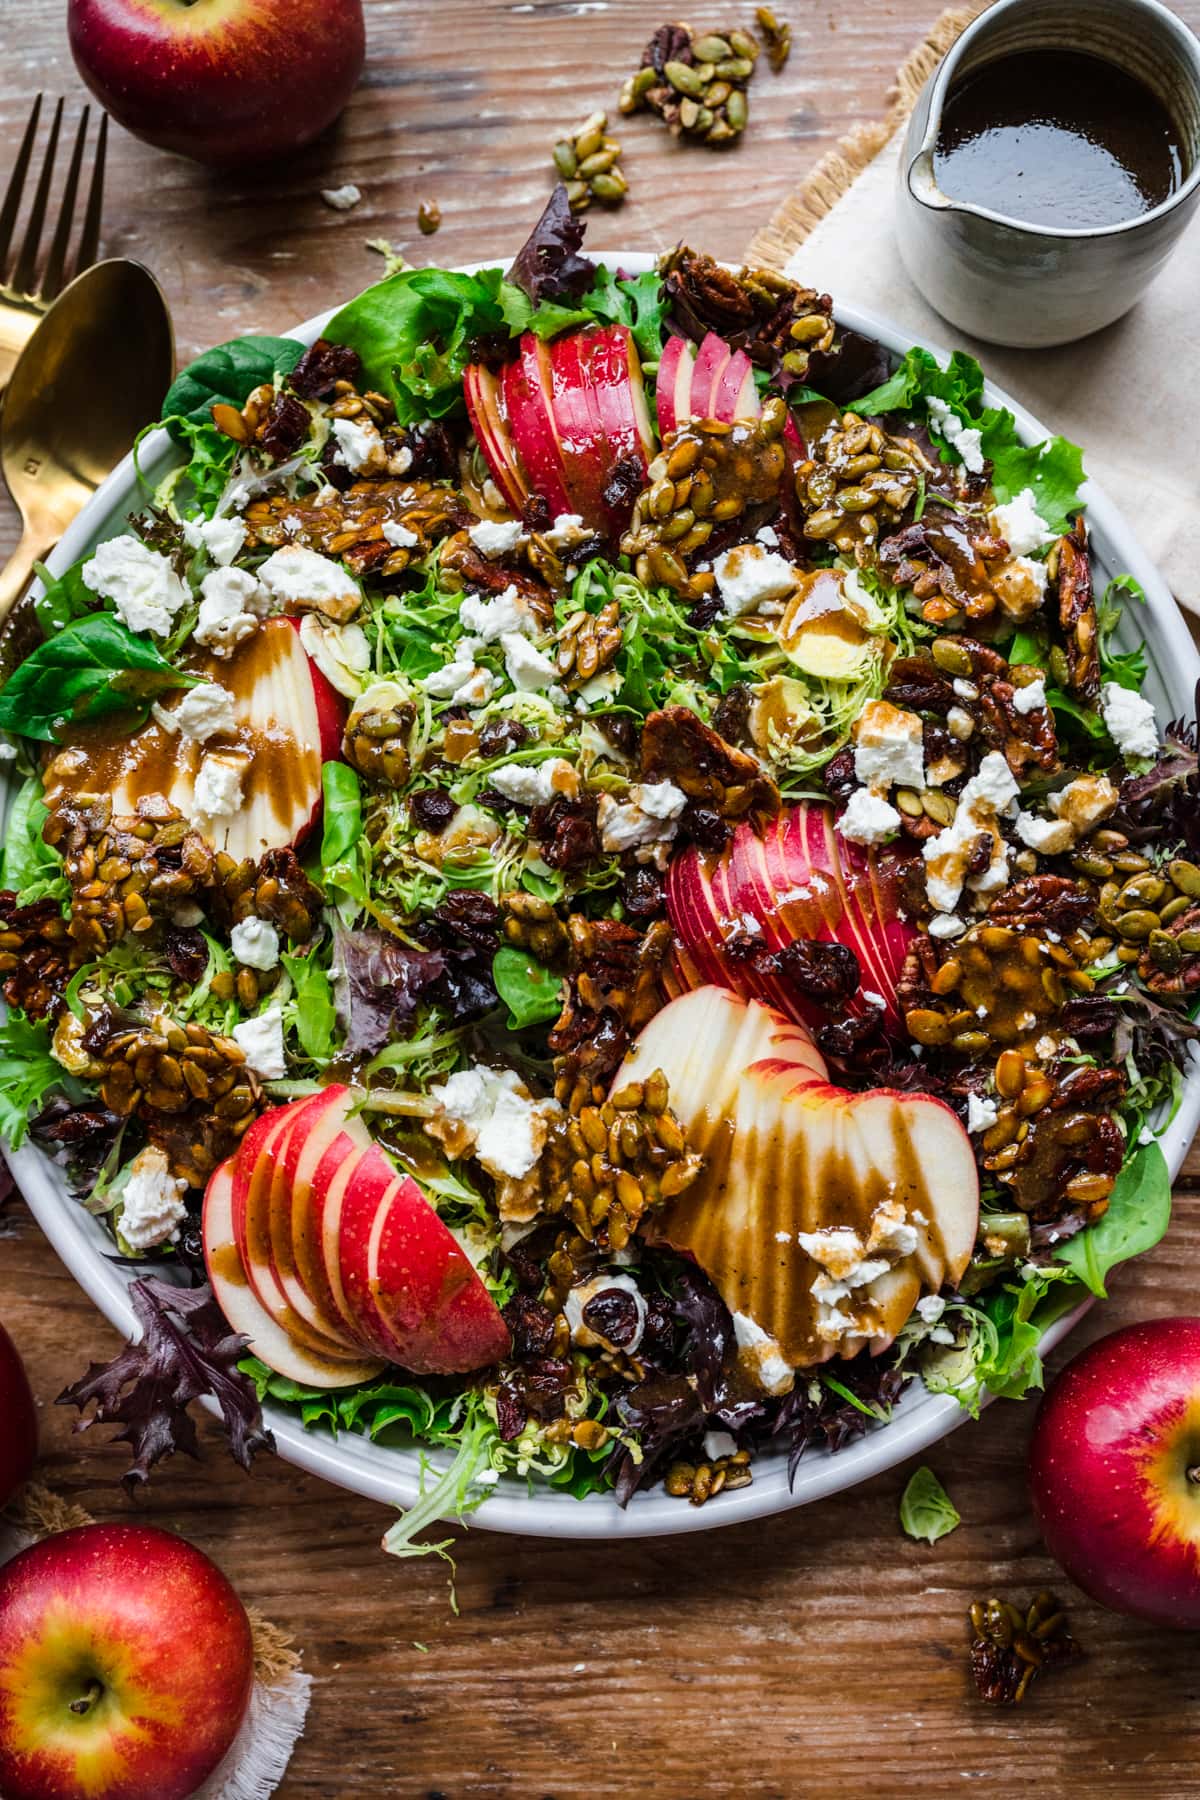 Overhead view of salad topped with balsamic dressing.